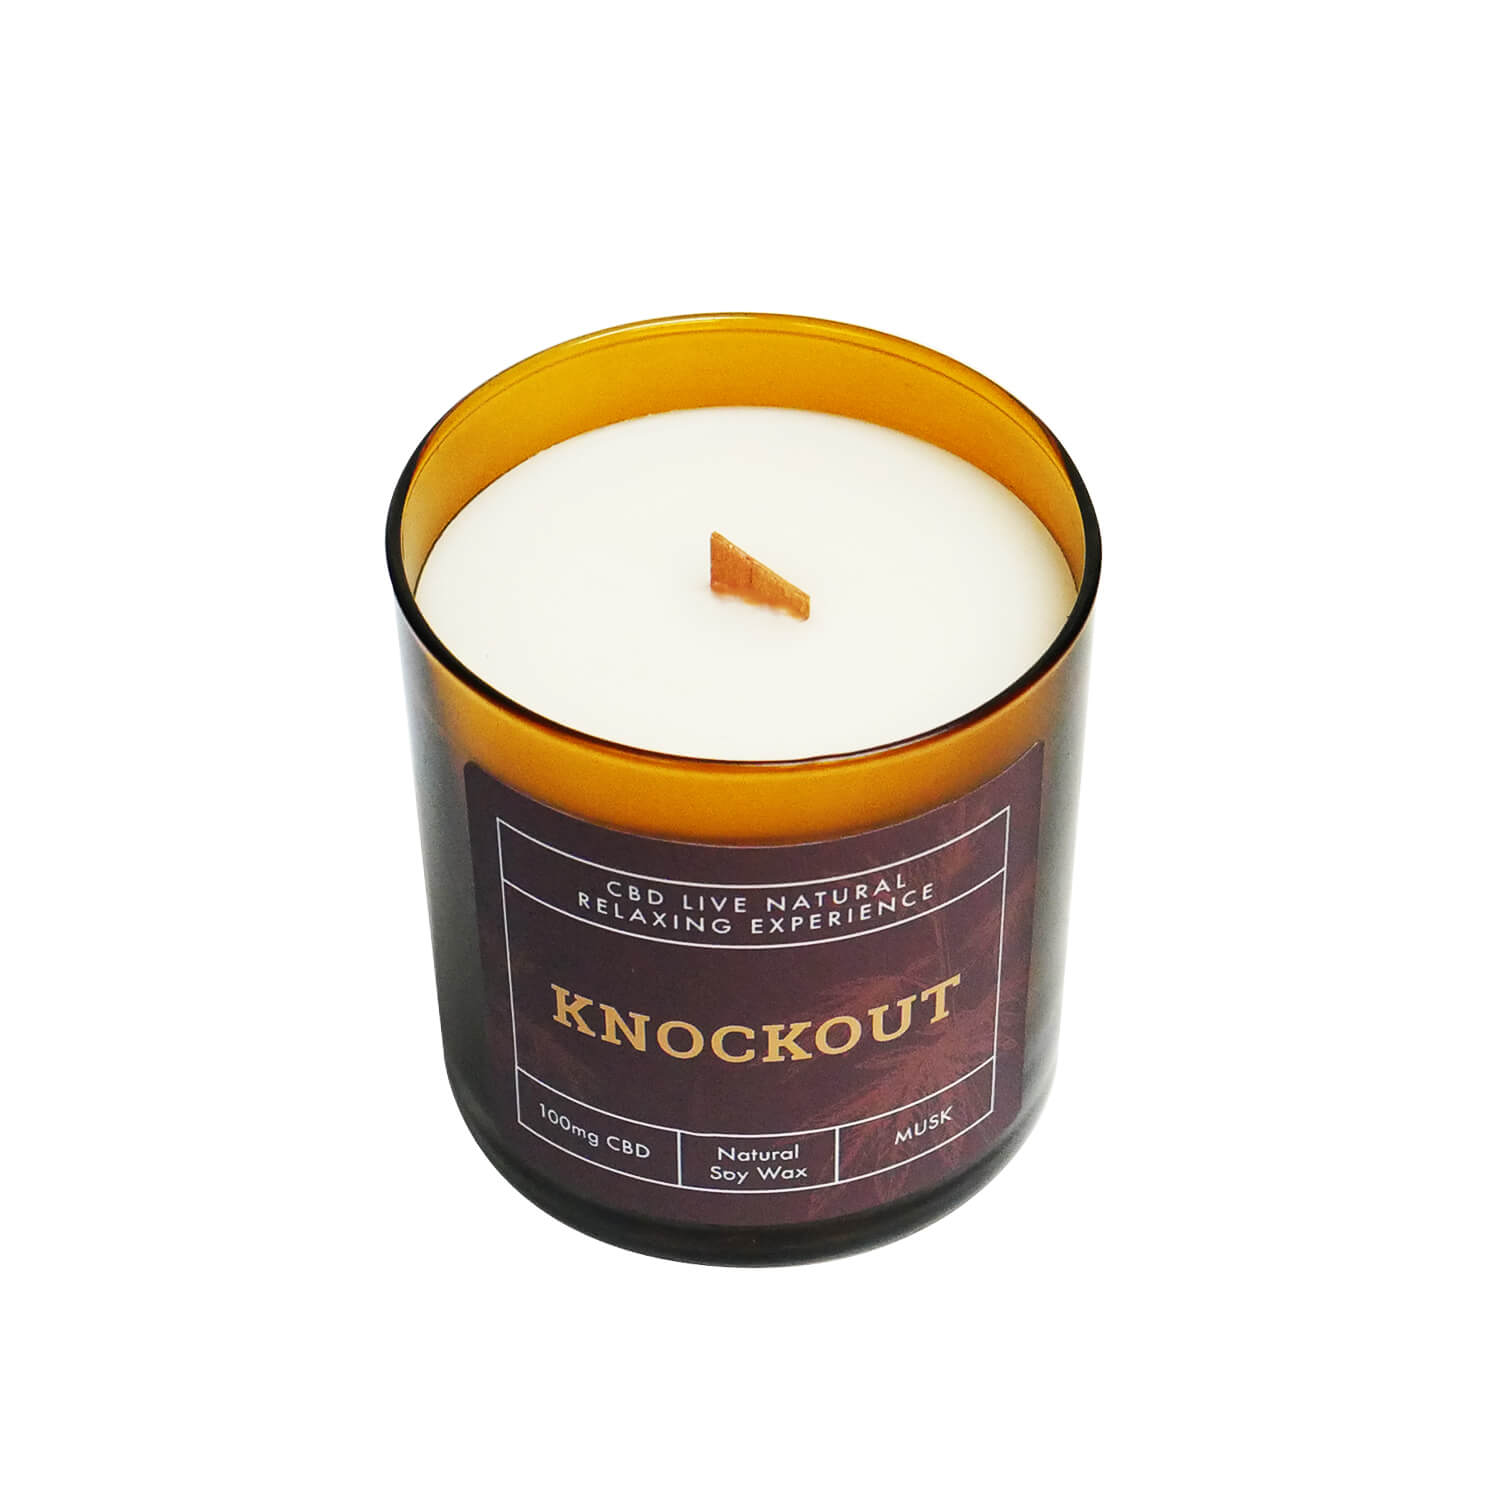 knockout musk candle top view